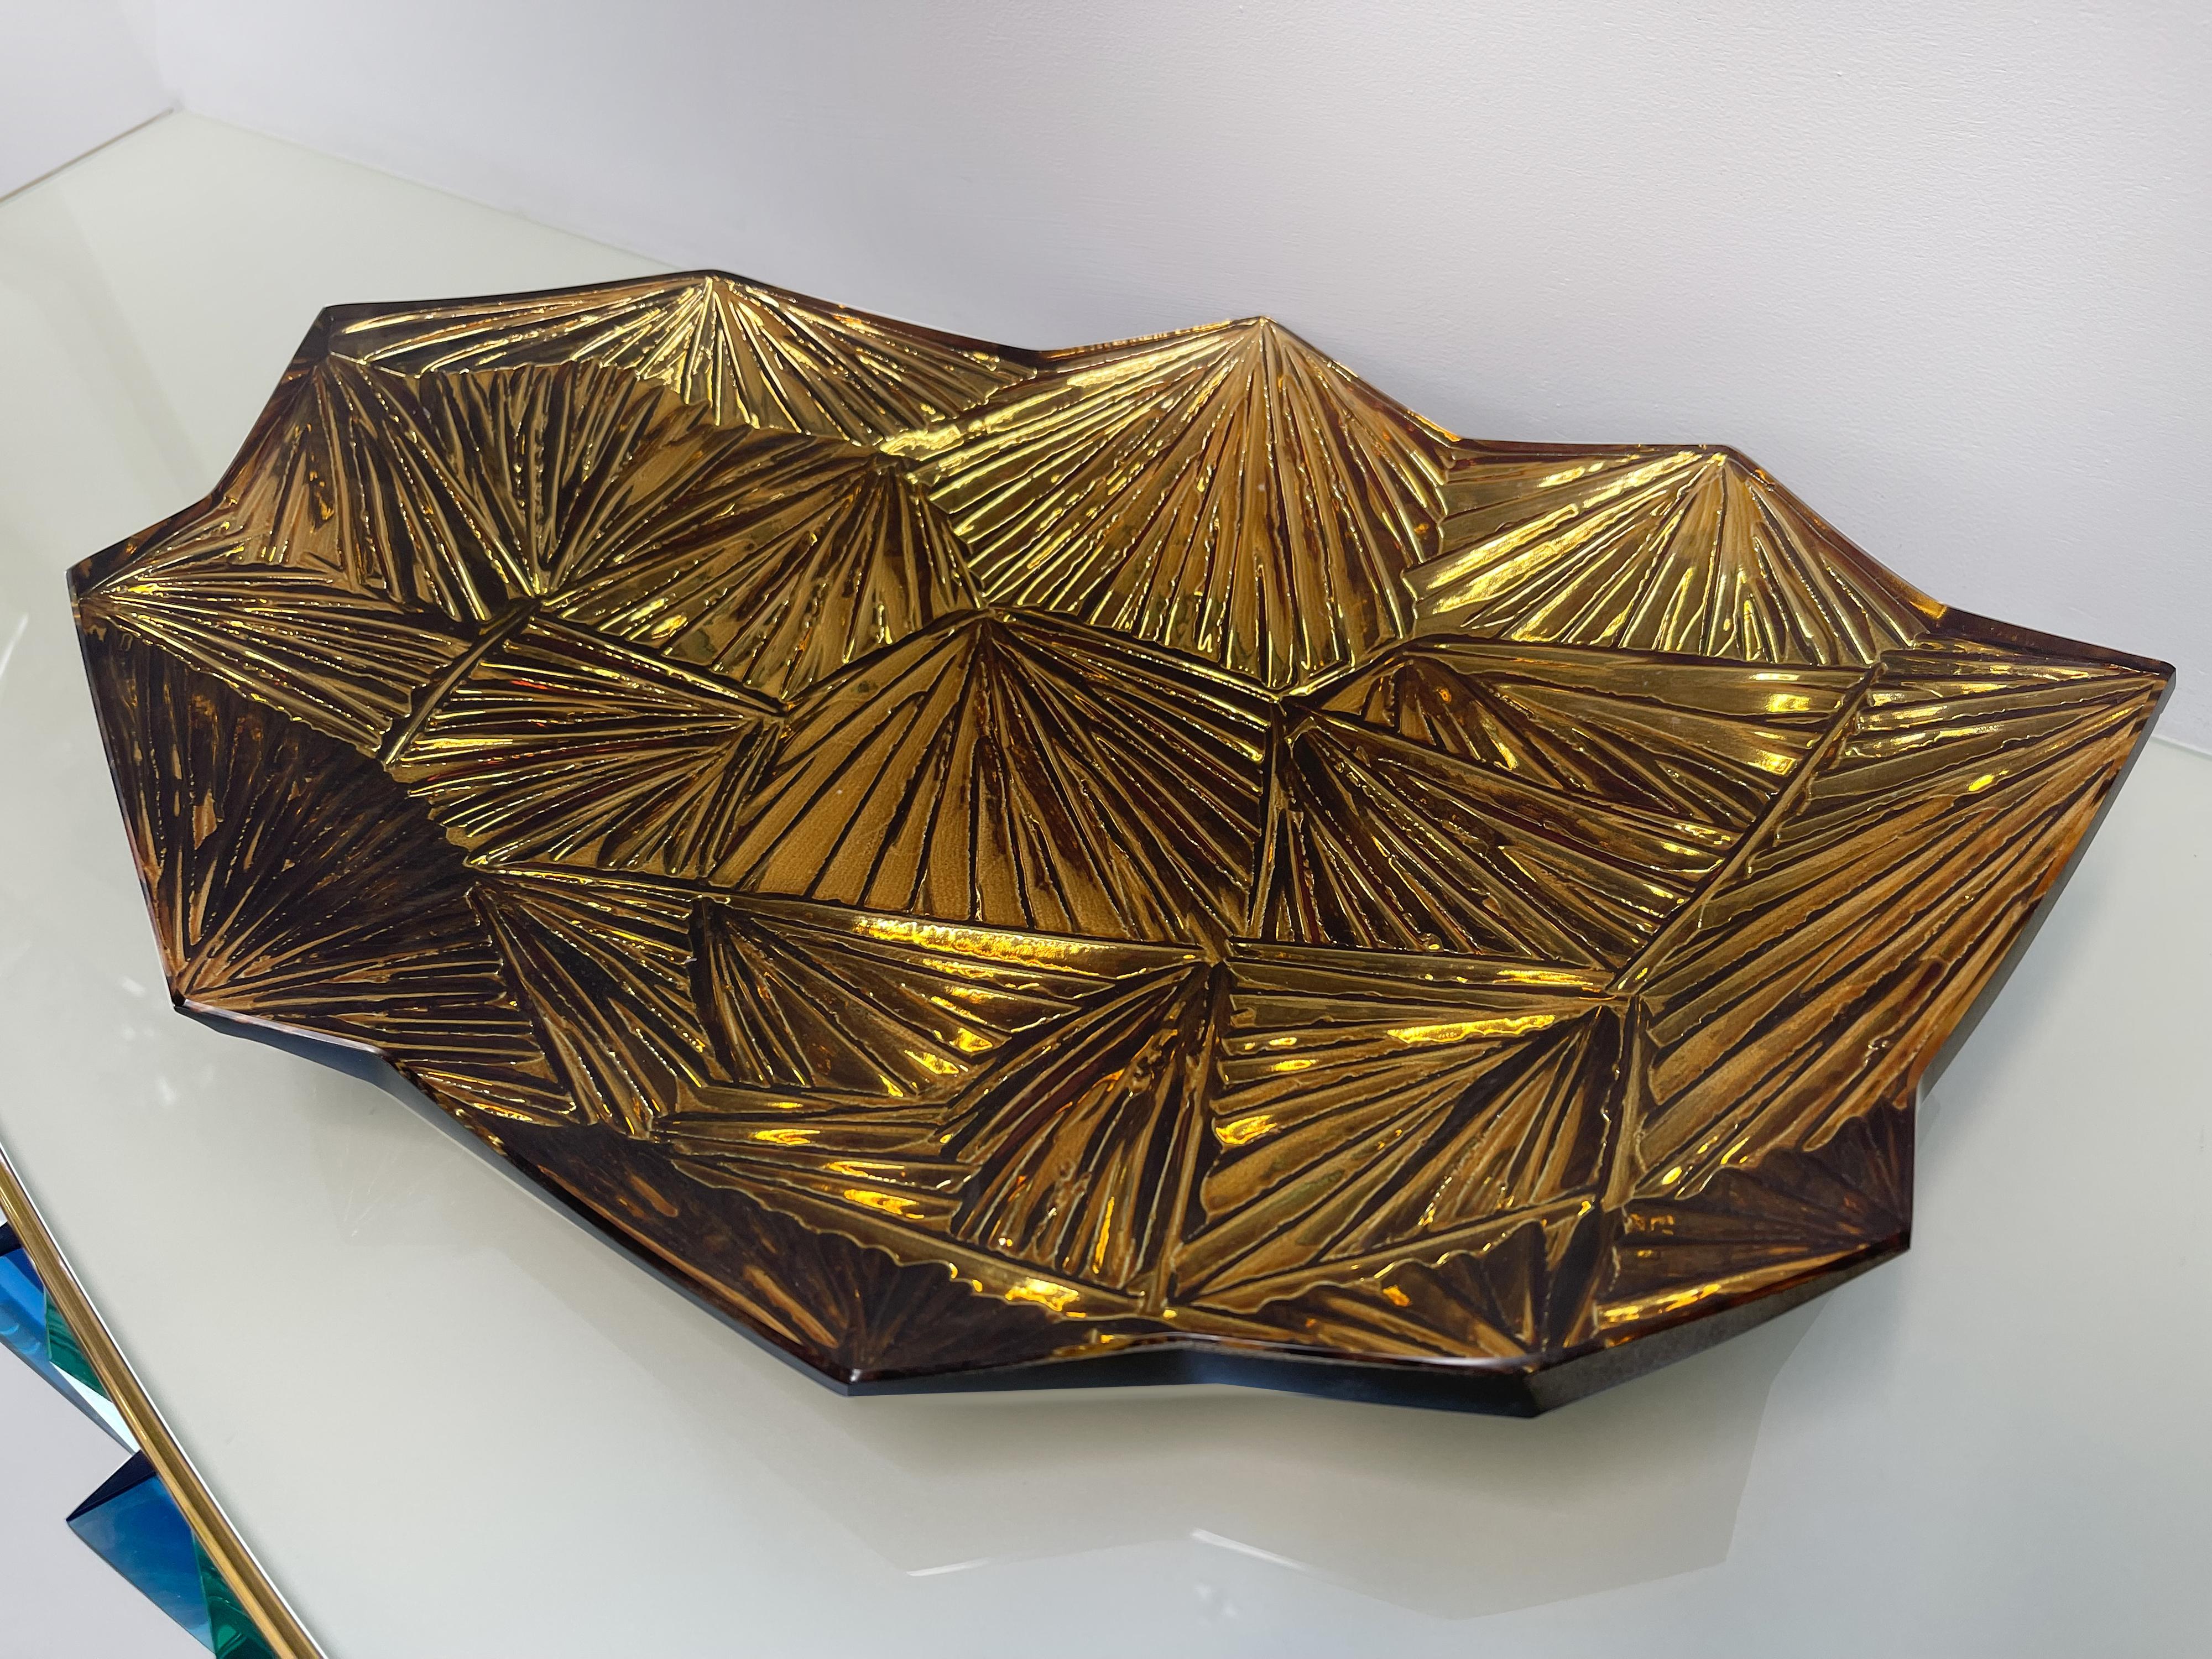 Contemporary 'Amber' Artistic Bowl Amber and Gold Crystal by Ghirò Studio In New Condition For Sale In Pieve Emanuele, Milano